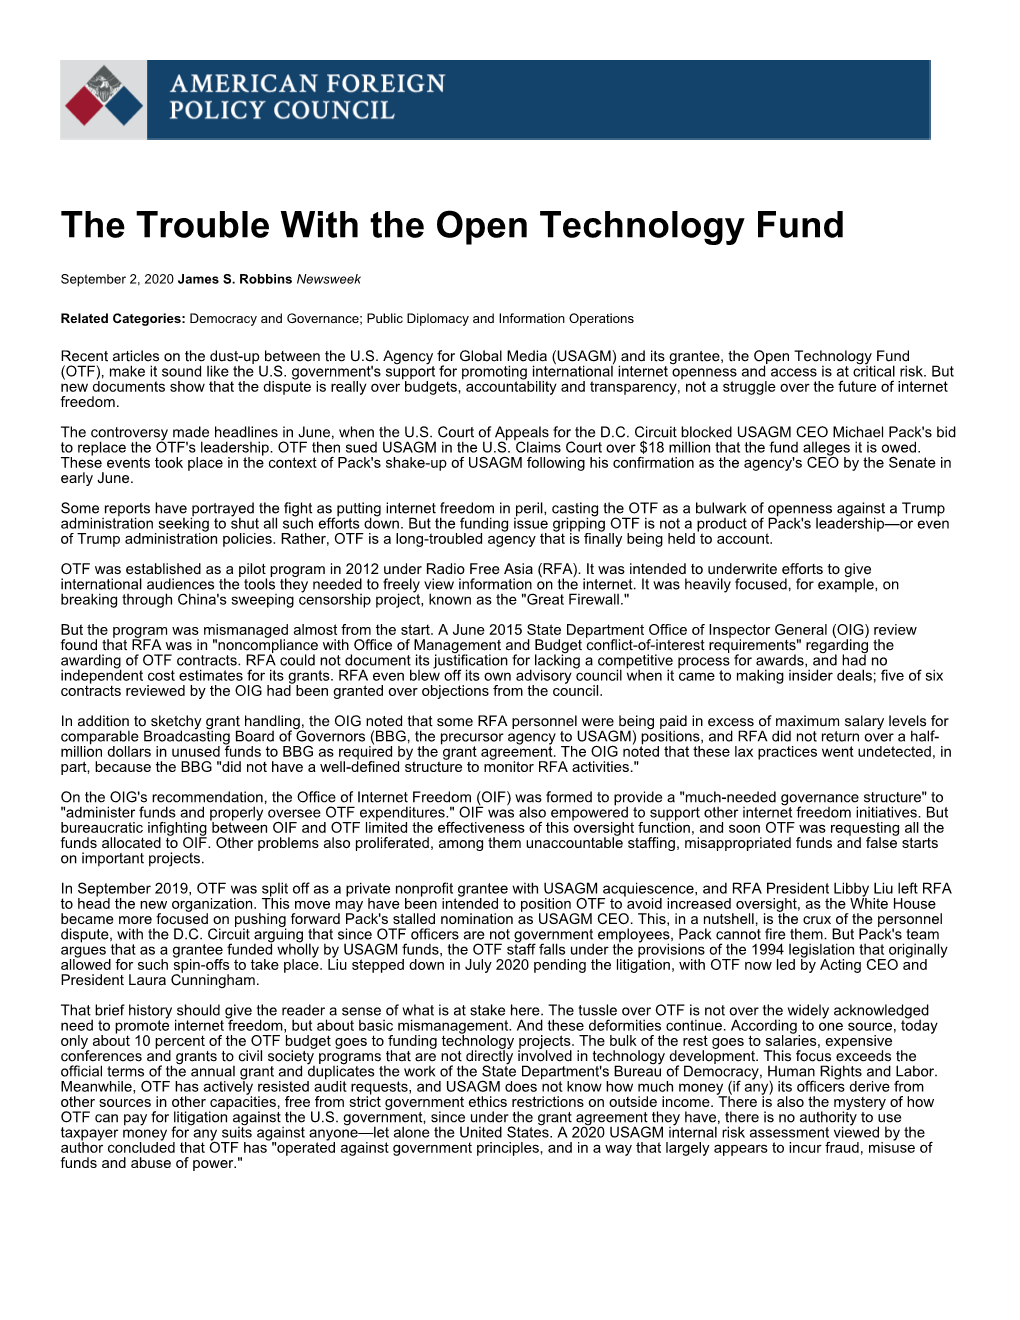 The Trouble with the Open Technology Fund | American